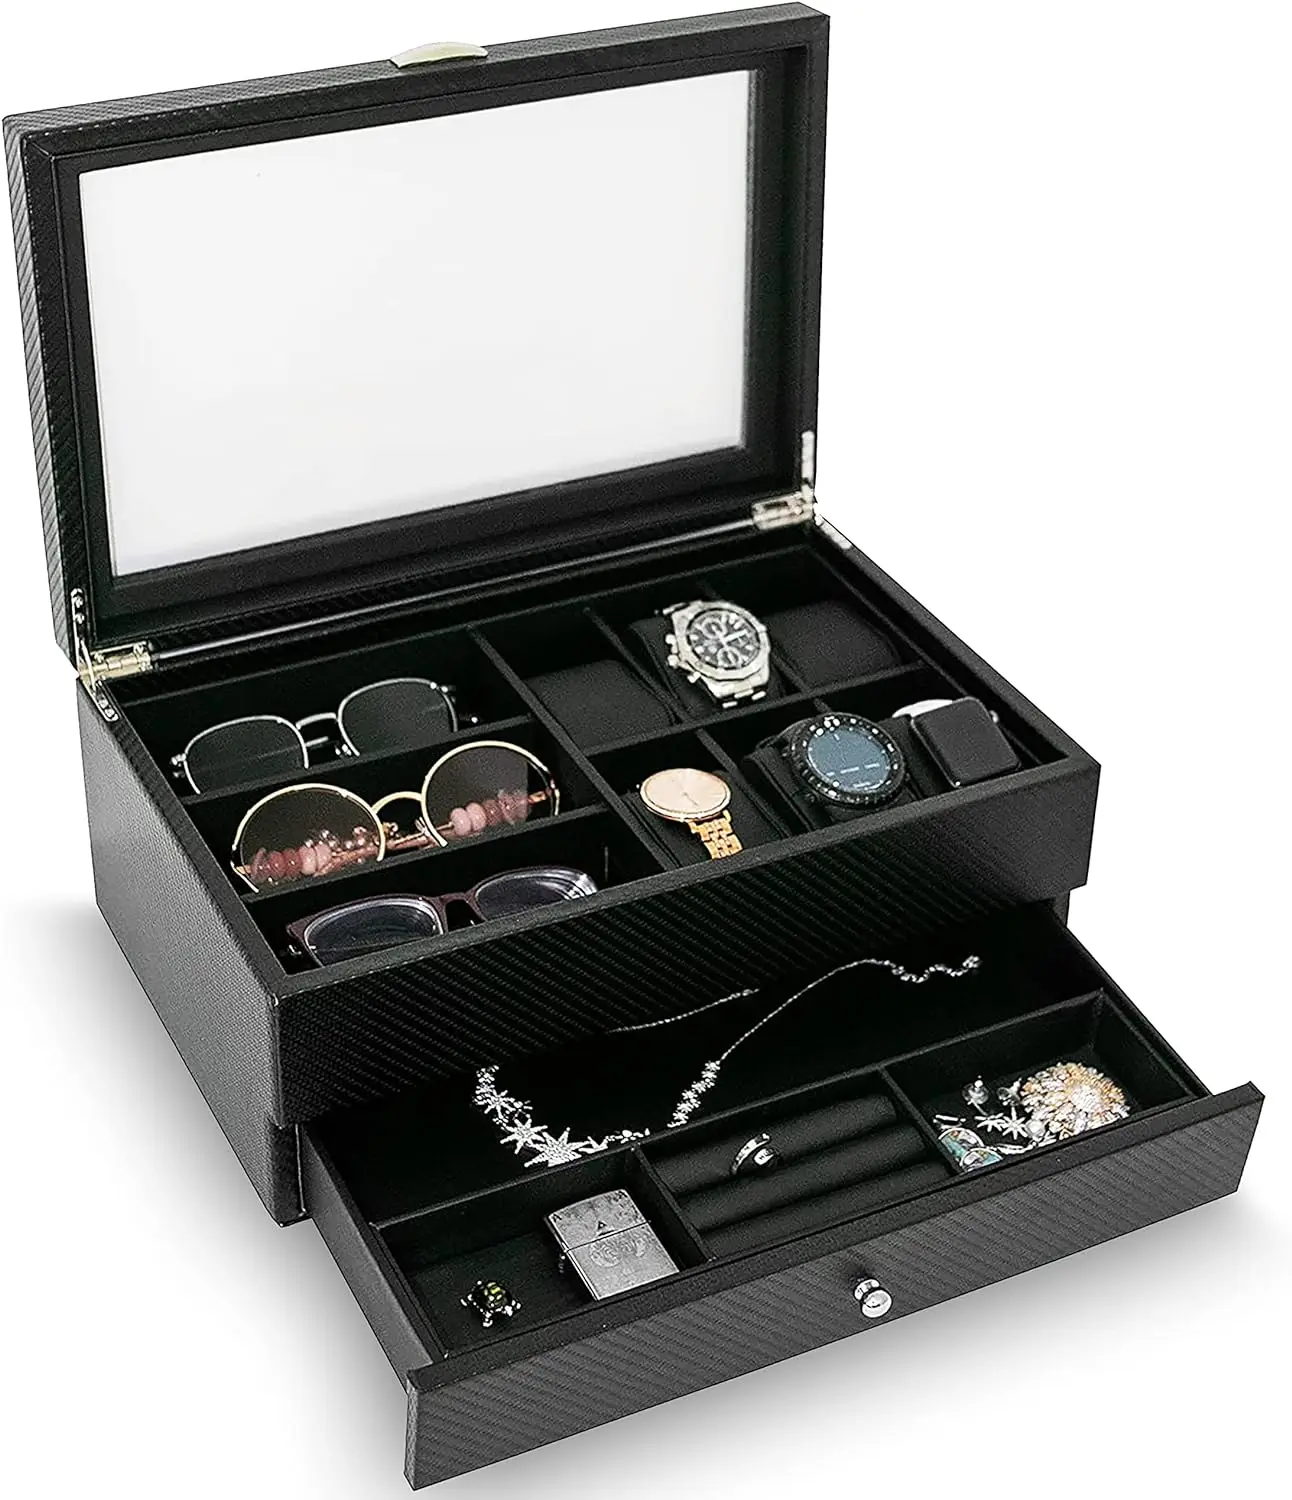 

Box Organizer For Men Jewelry Box, Watch Case Sunglass Organizer Valet Tray Mens Jewelry Organizer Holds 6 Watches 3 Sunglasses